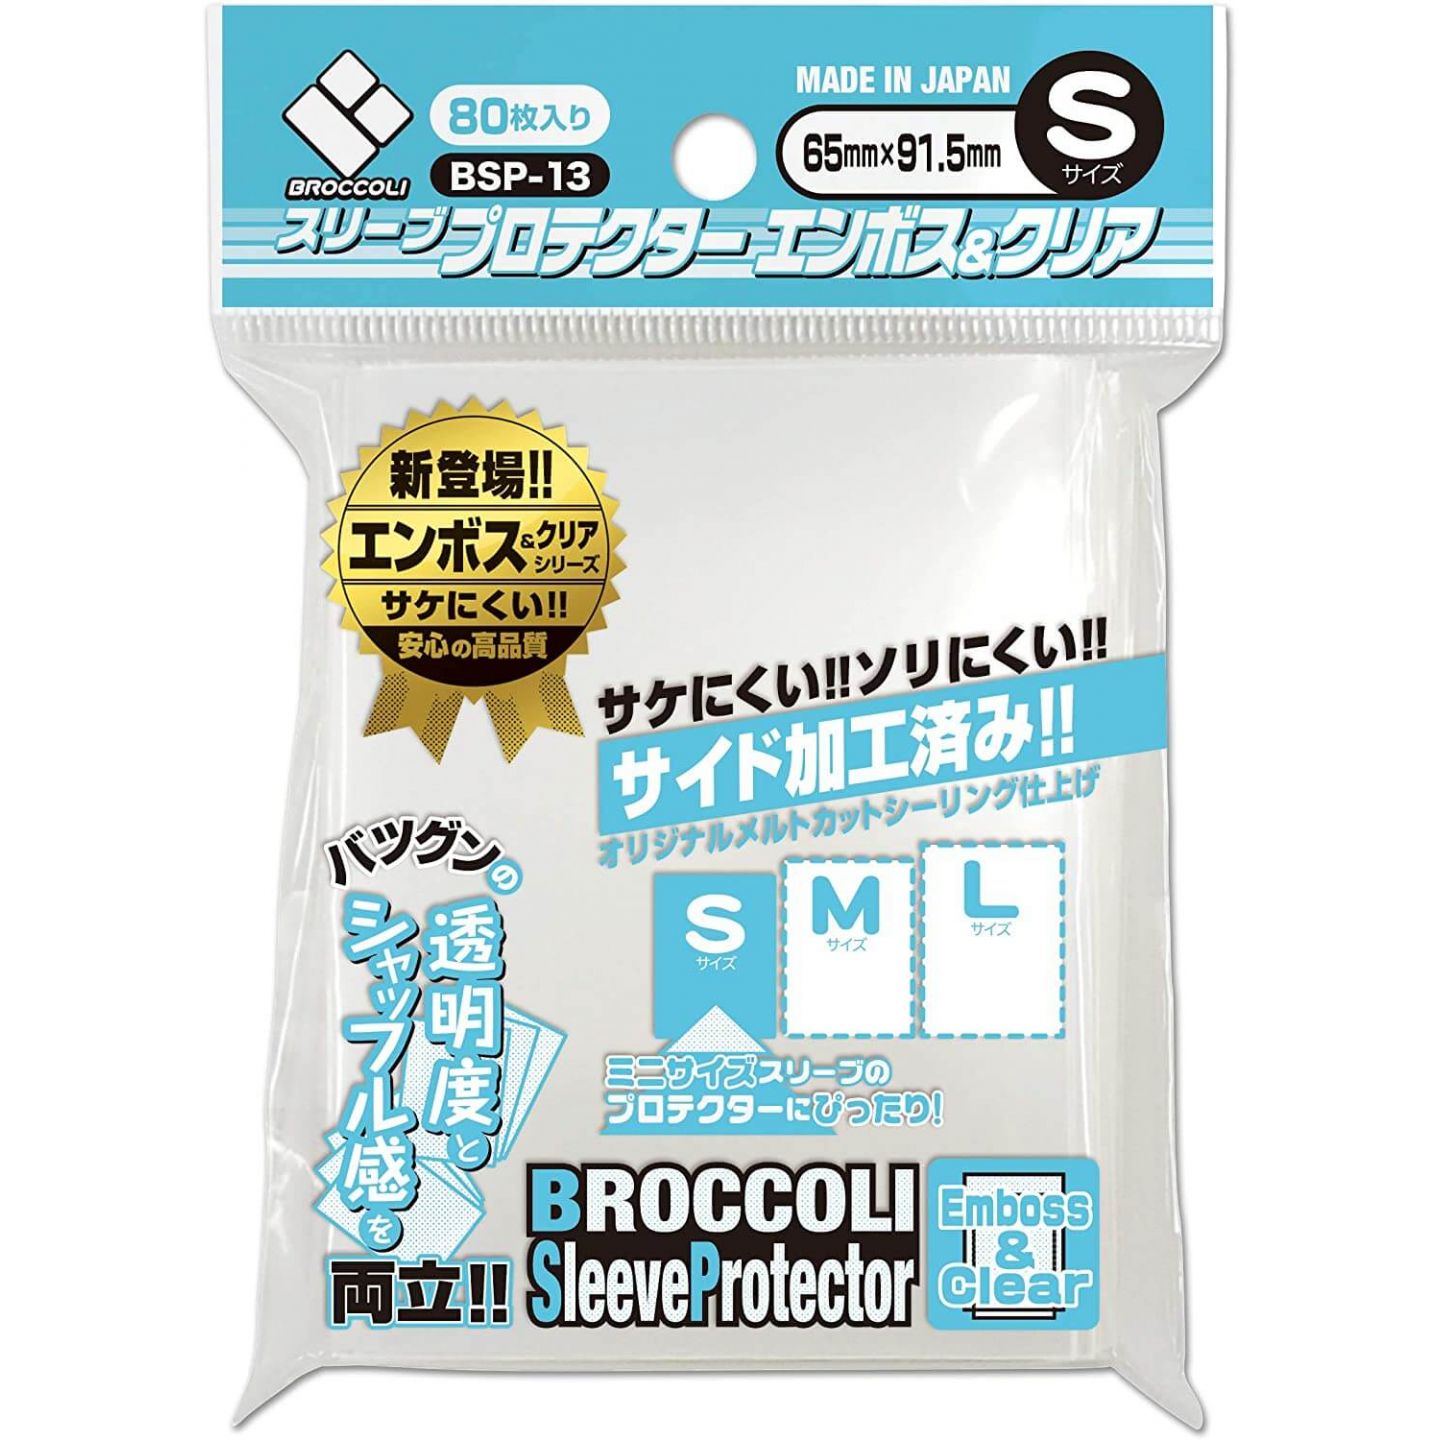 Broccoli Sleeve Protector Mat and Clear M BSP-08 